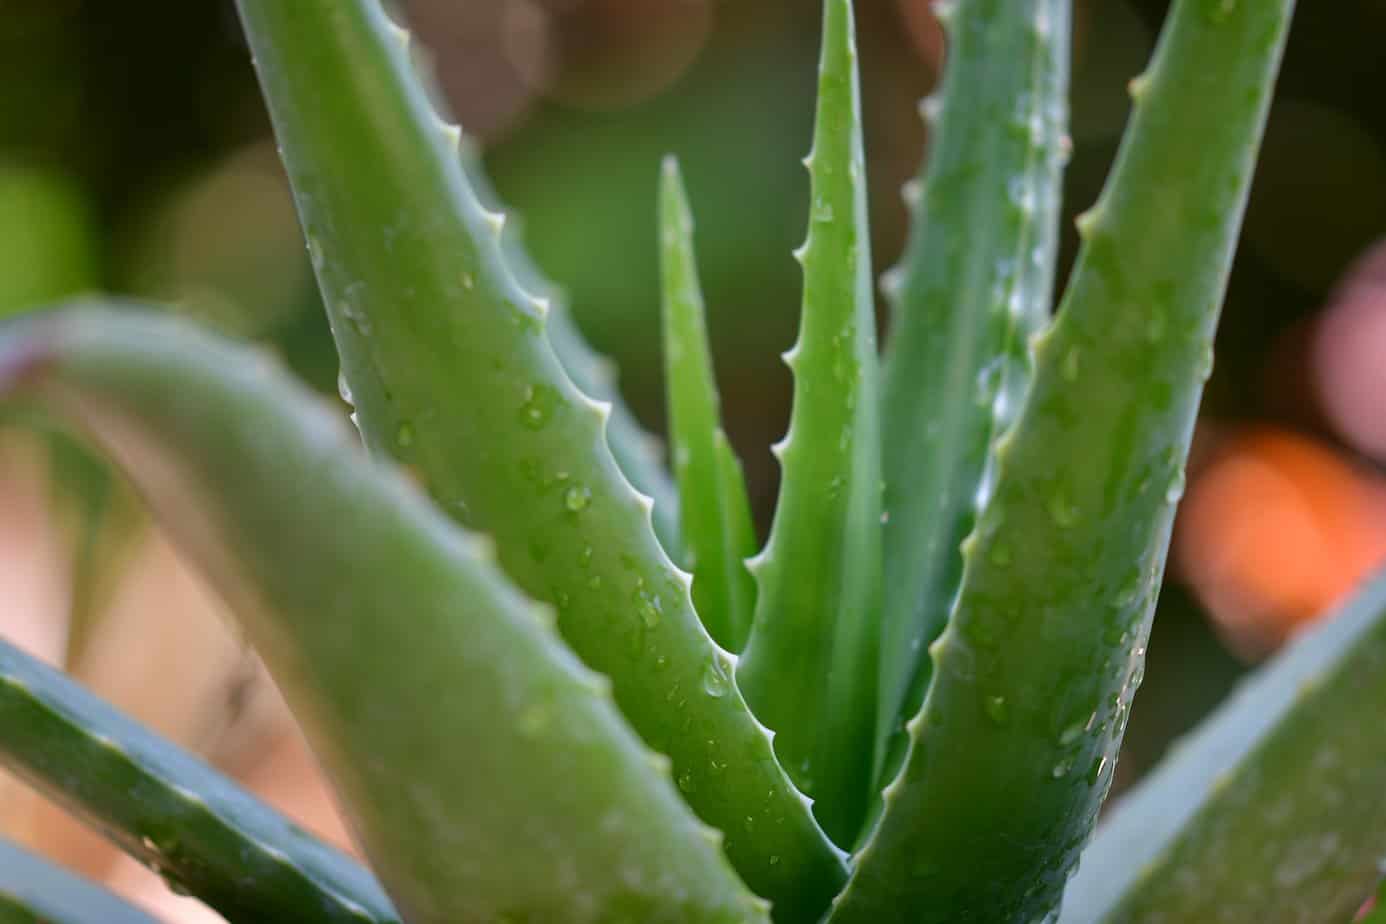 Delicious ideas for using aloe vera in the home kitchen fit